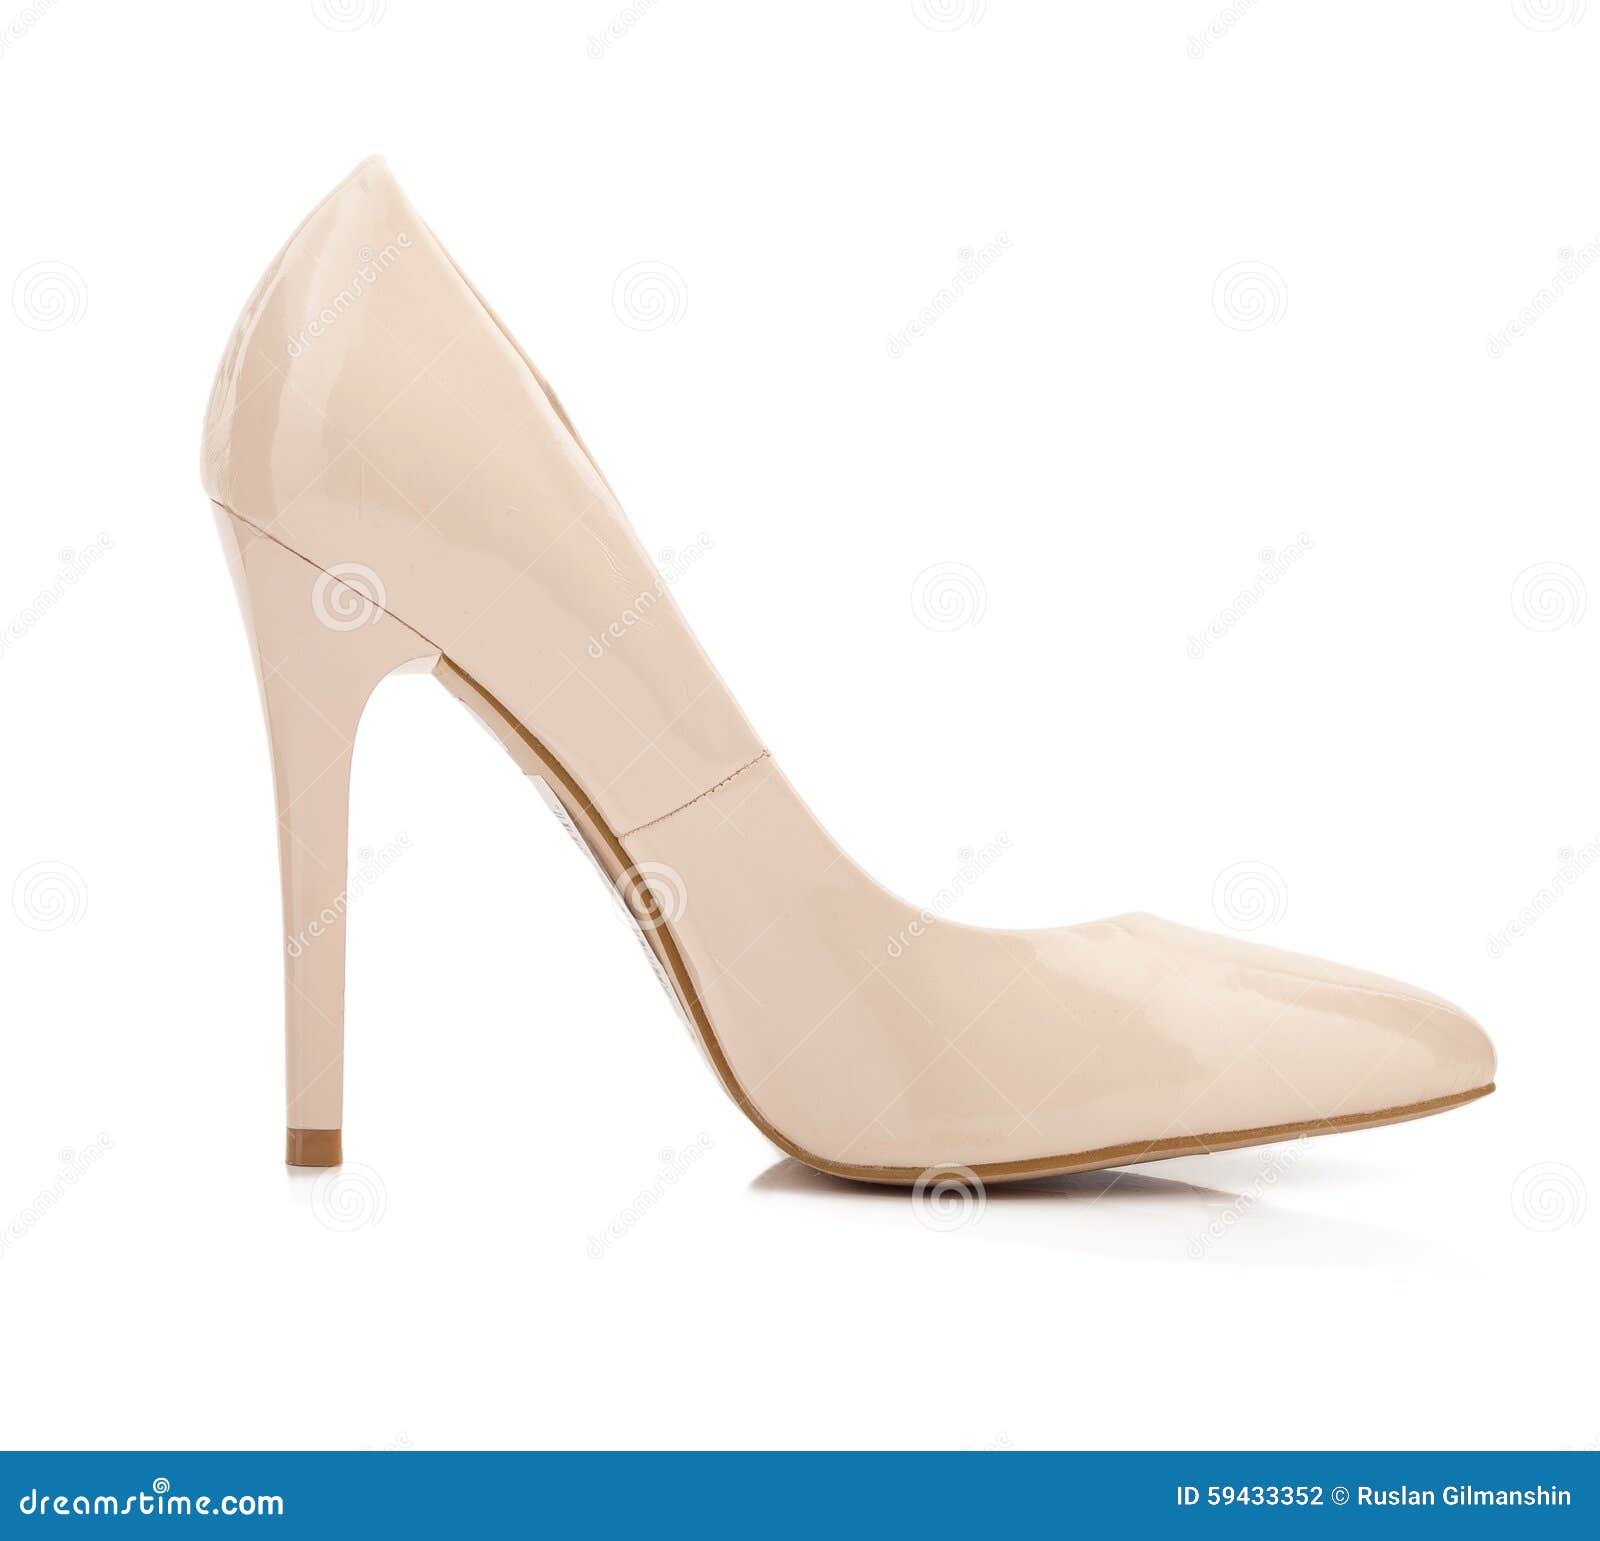 Beige High Heel Shoes Isolated on White Stock Photo - Image of elegance ...